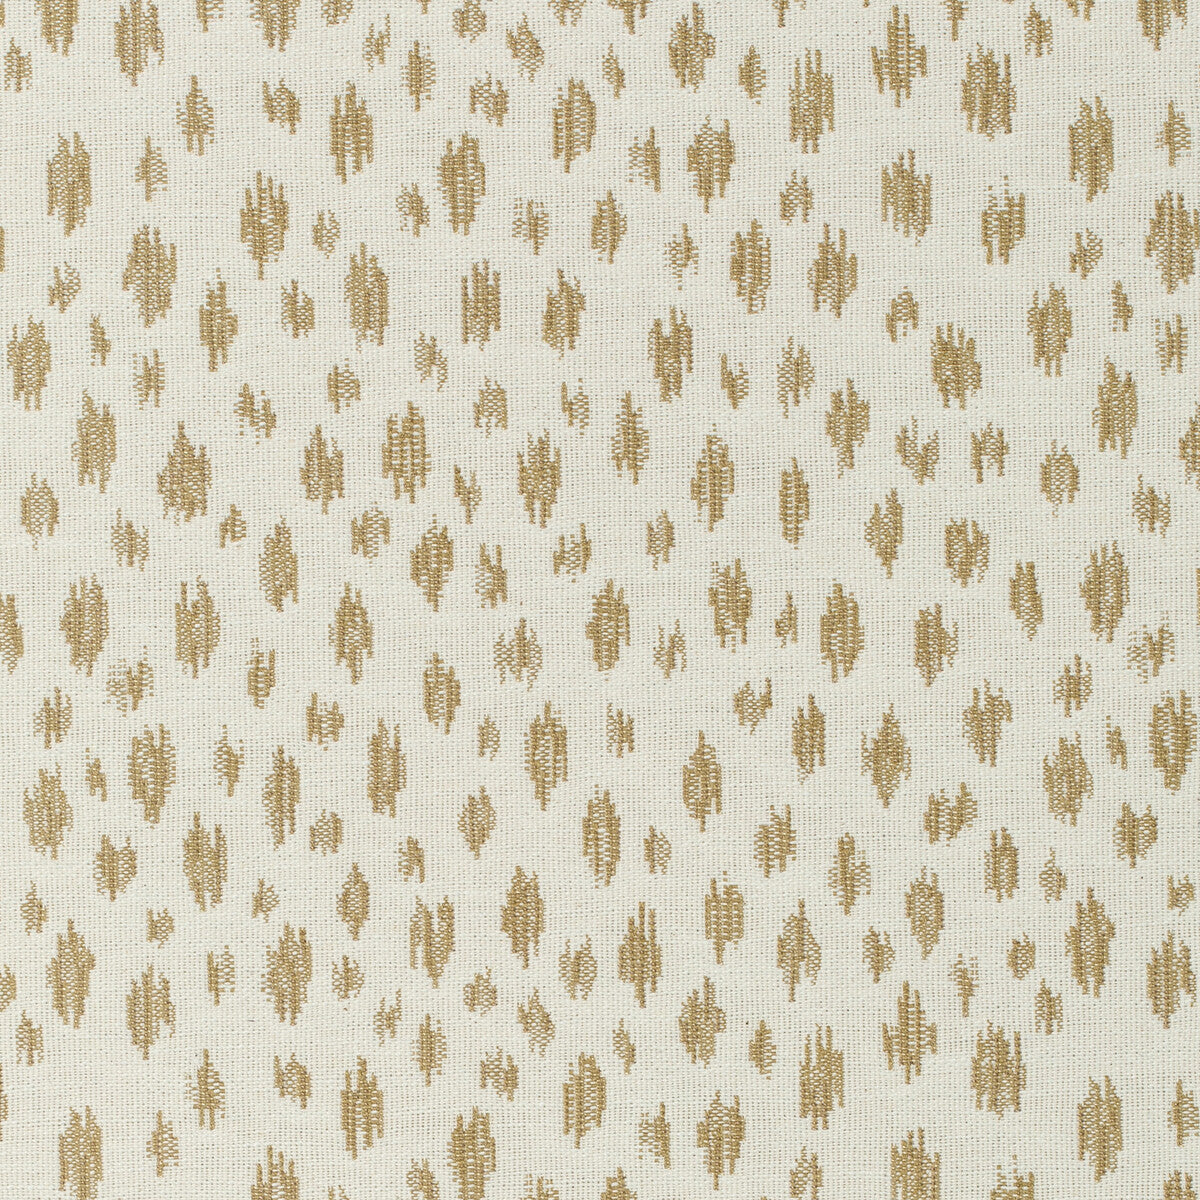 Honfleur Woven fabric in beige color - pattern 8020112.16.0 - by Brunschwig &amp; Fils in the Granville Weaves collection